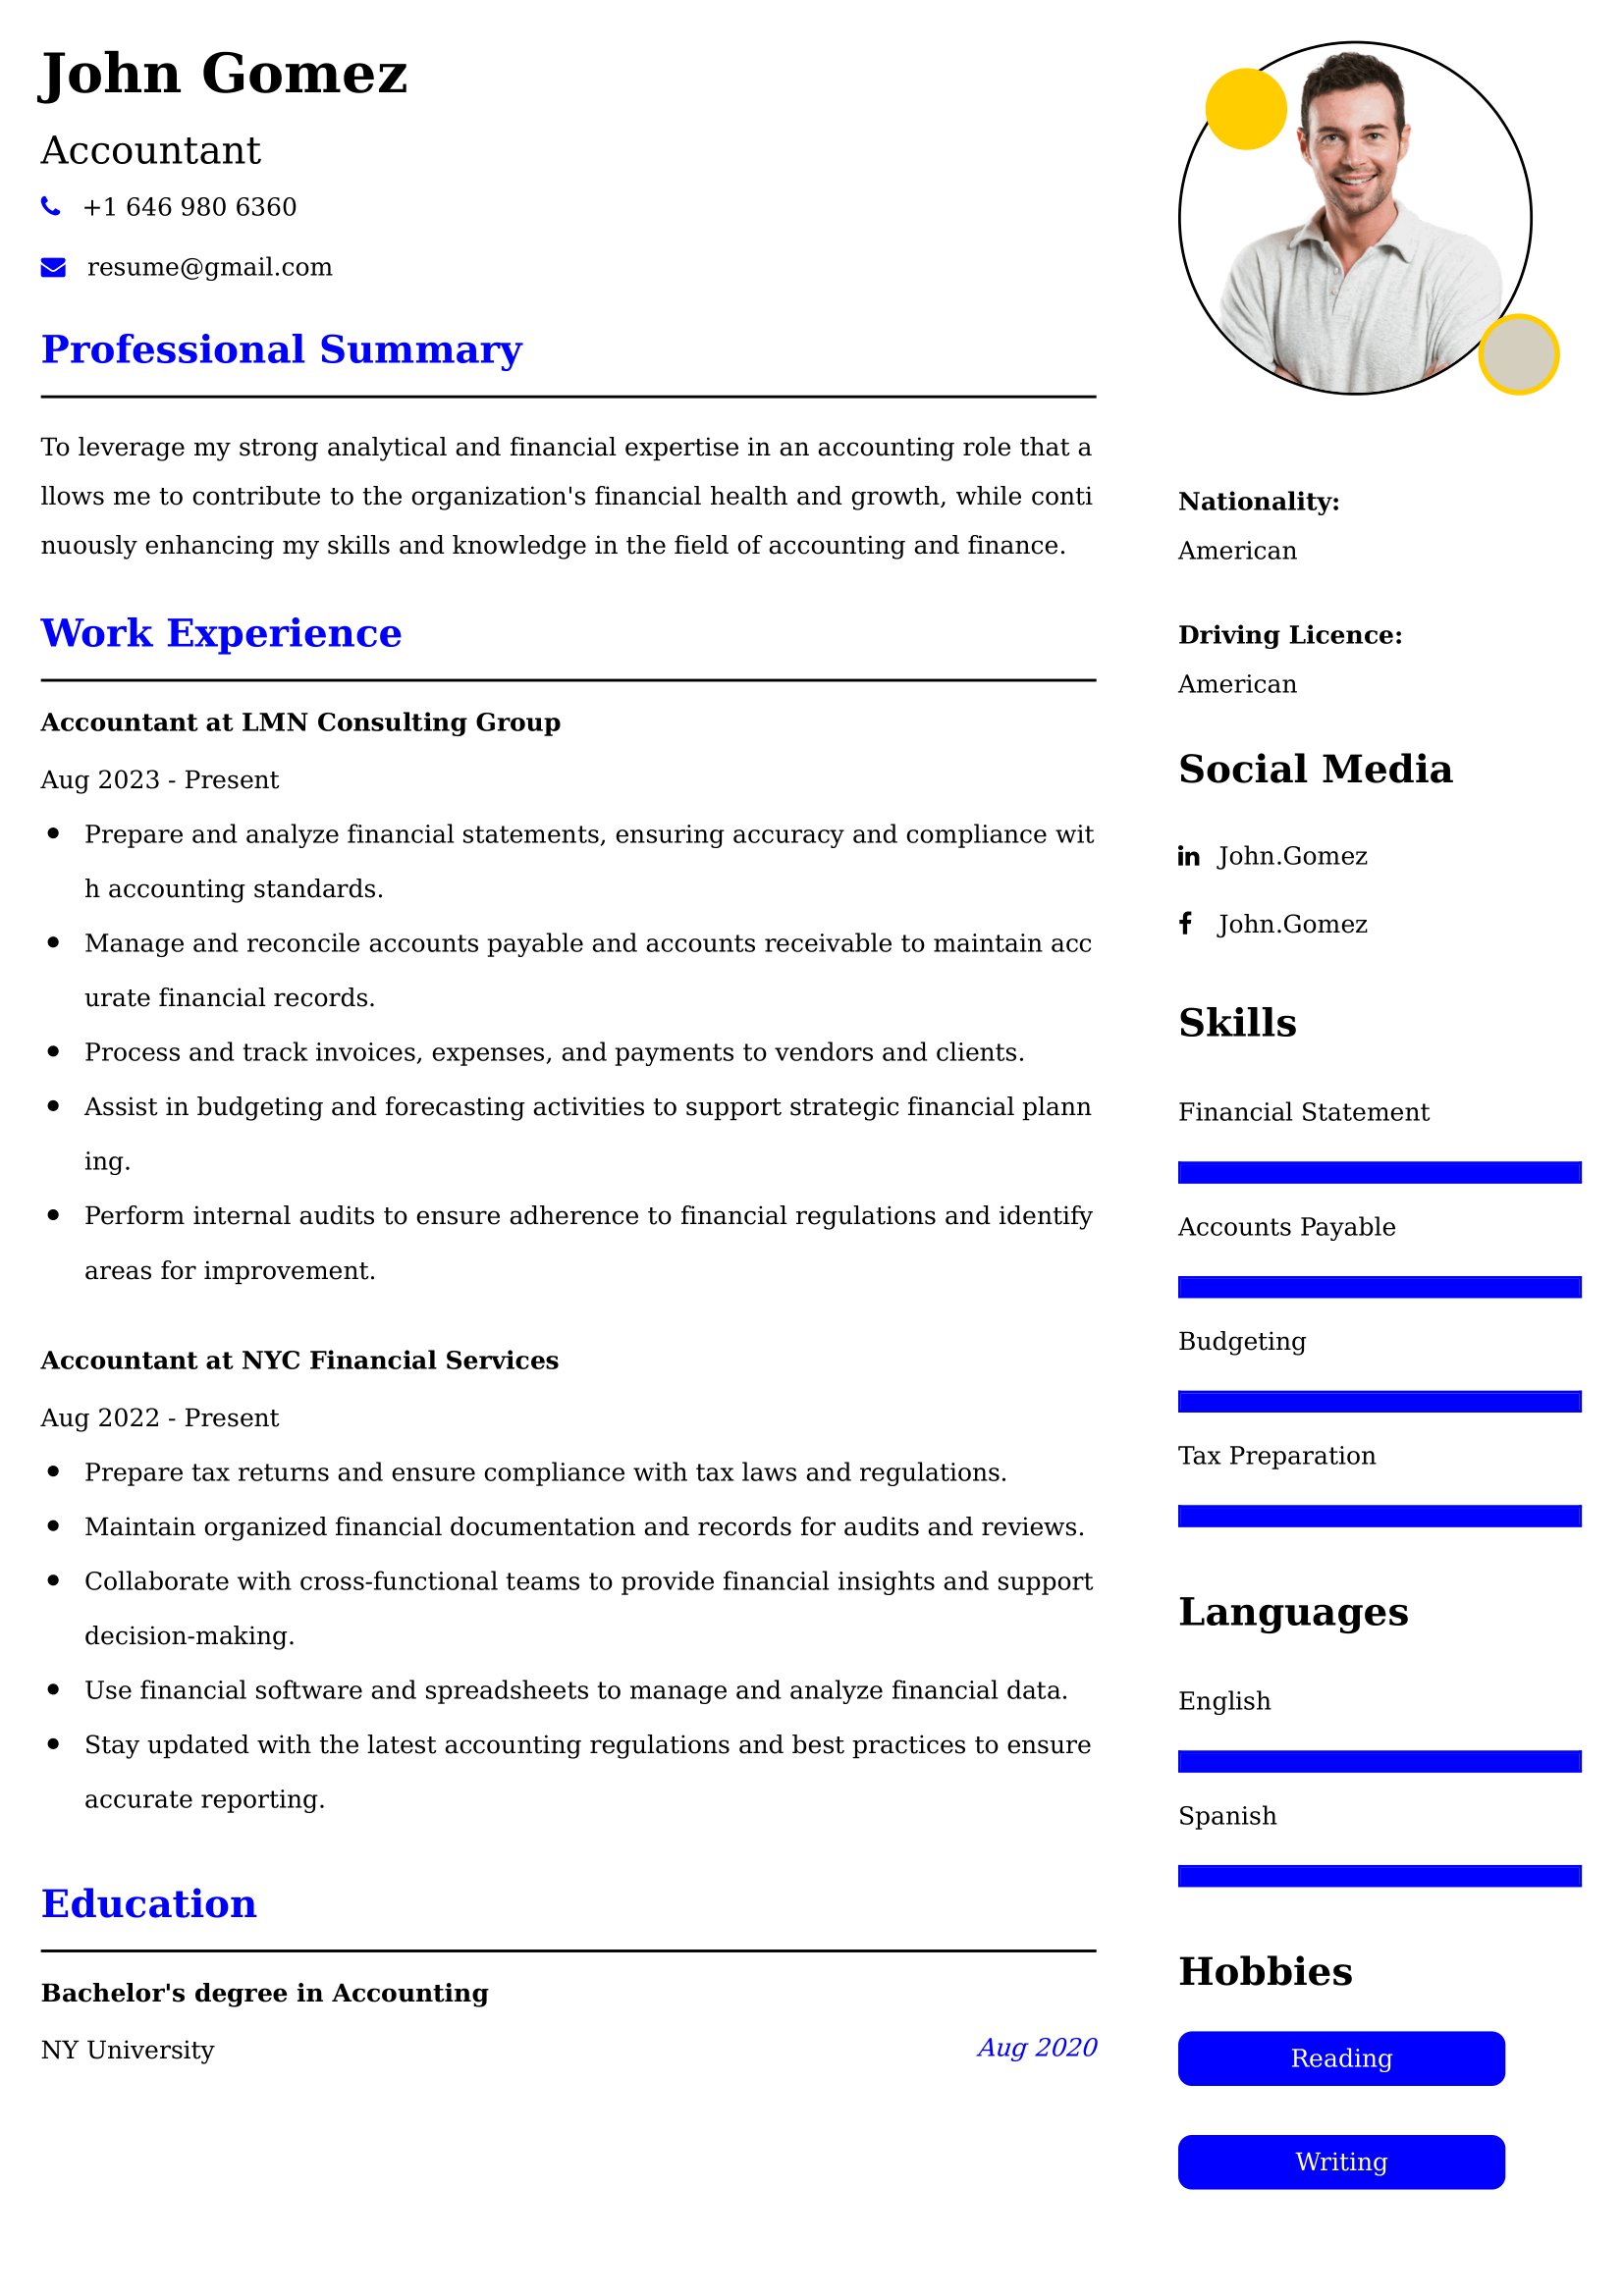 Accountant Resume Examples - Brazilian Format, Latest Template